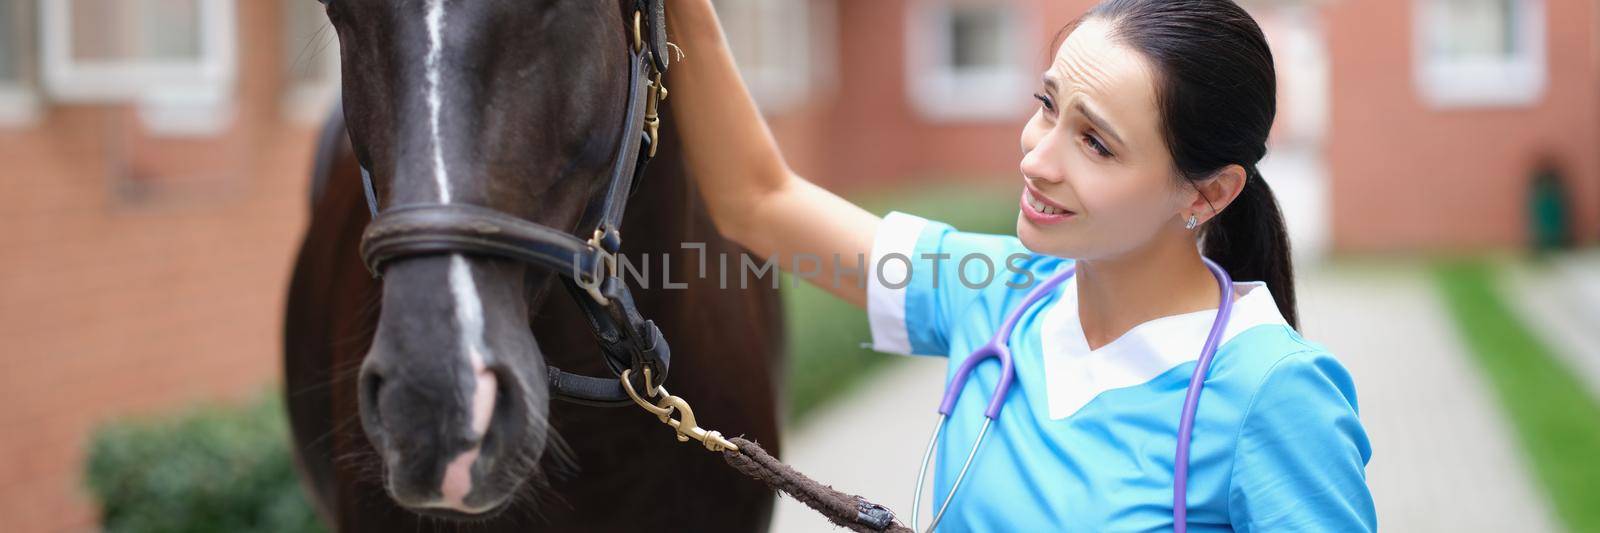 Woman veterinary doctor holding thoroughbred horse by bridle in stable and stroking head. Medical care for horses concept